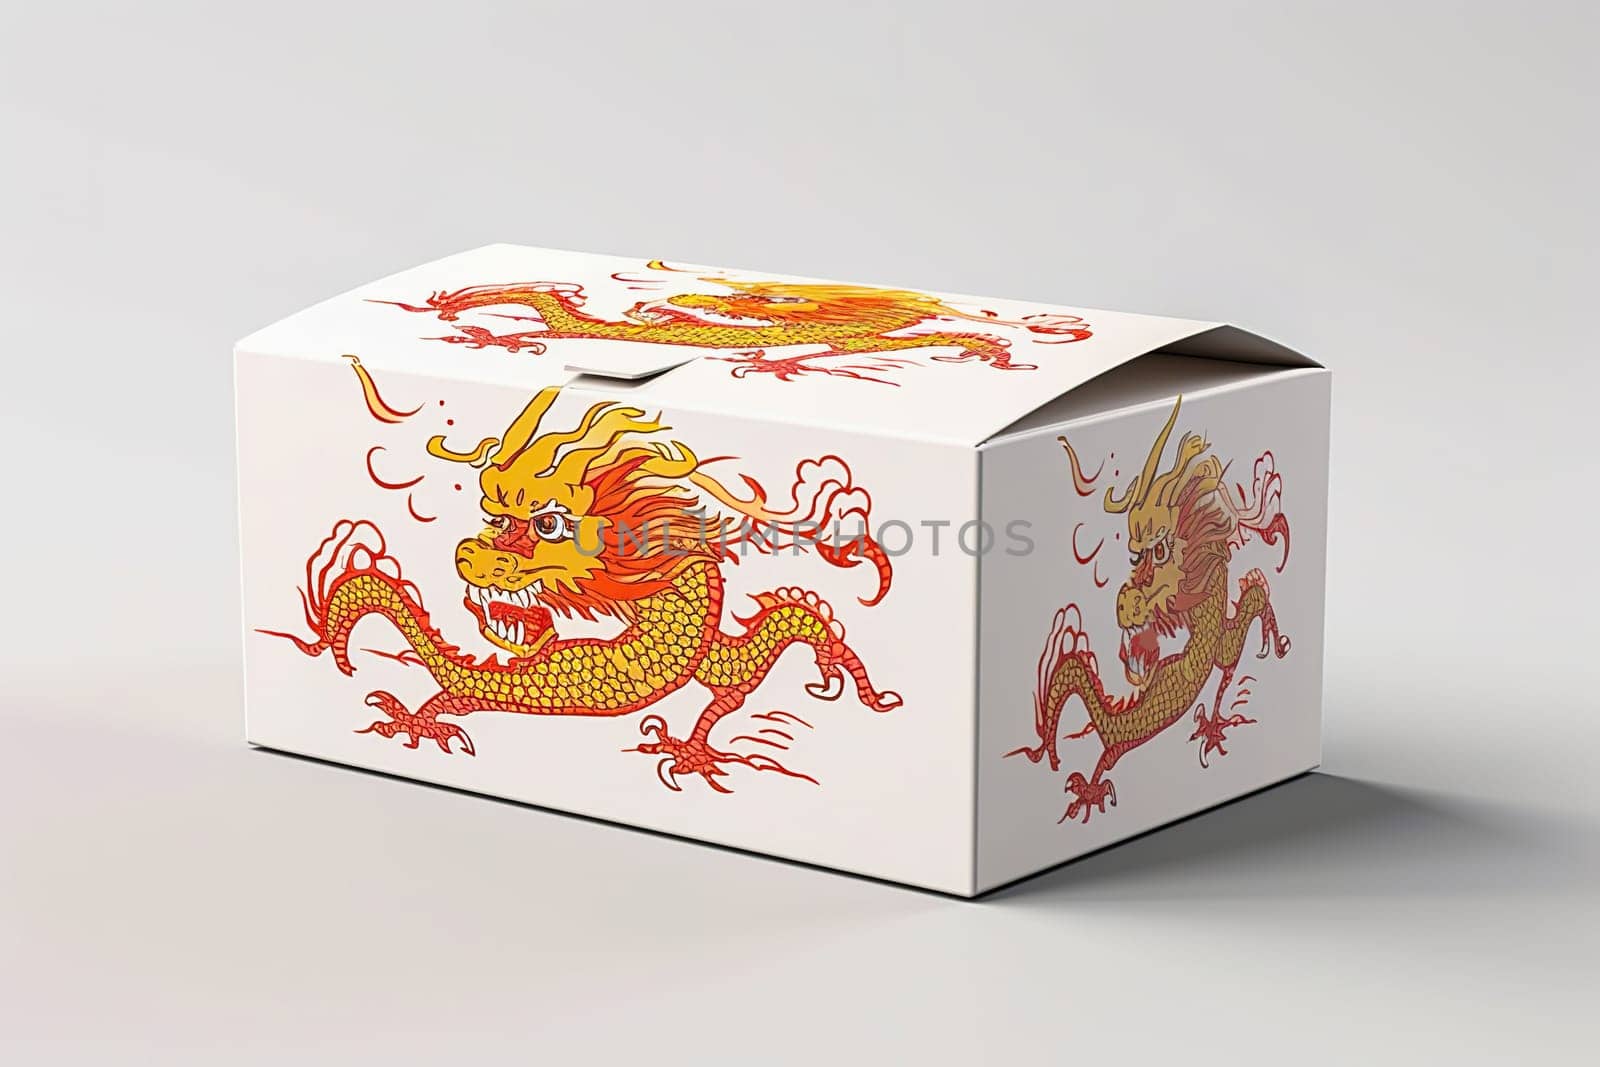 Food packaging box with dragon pattern. by Yurich32